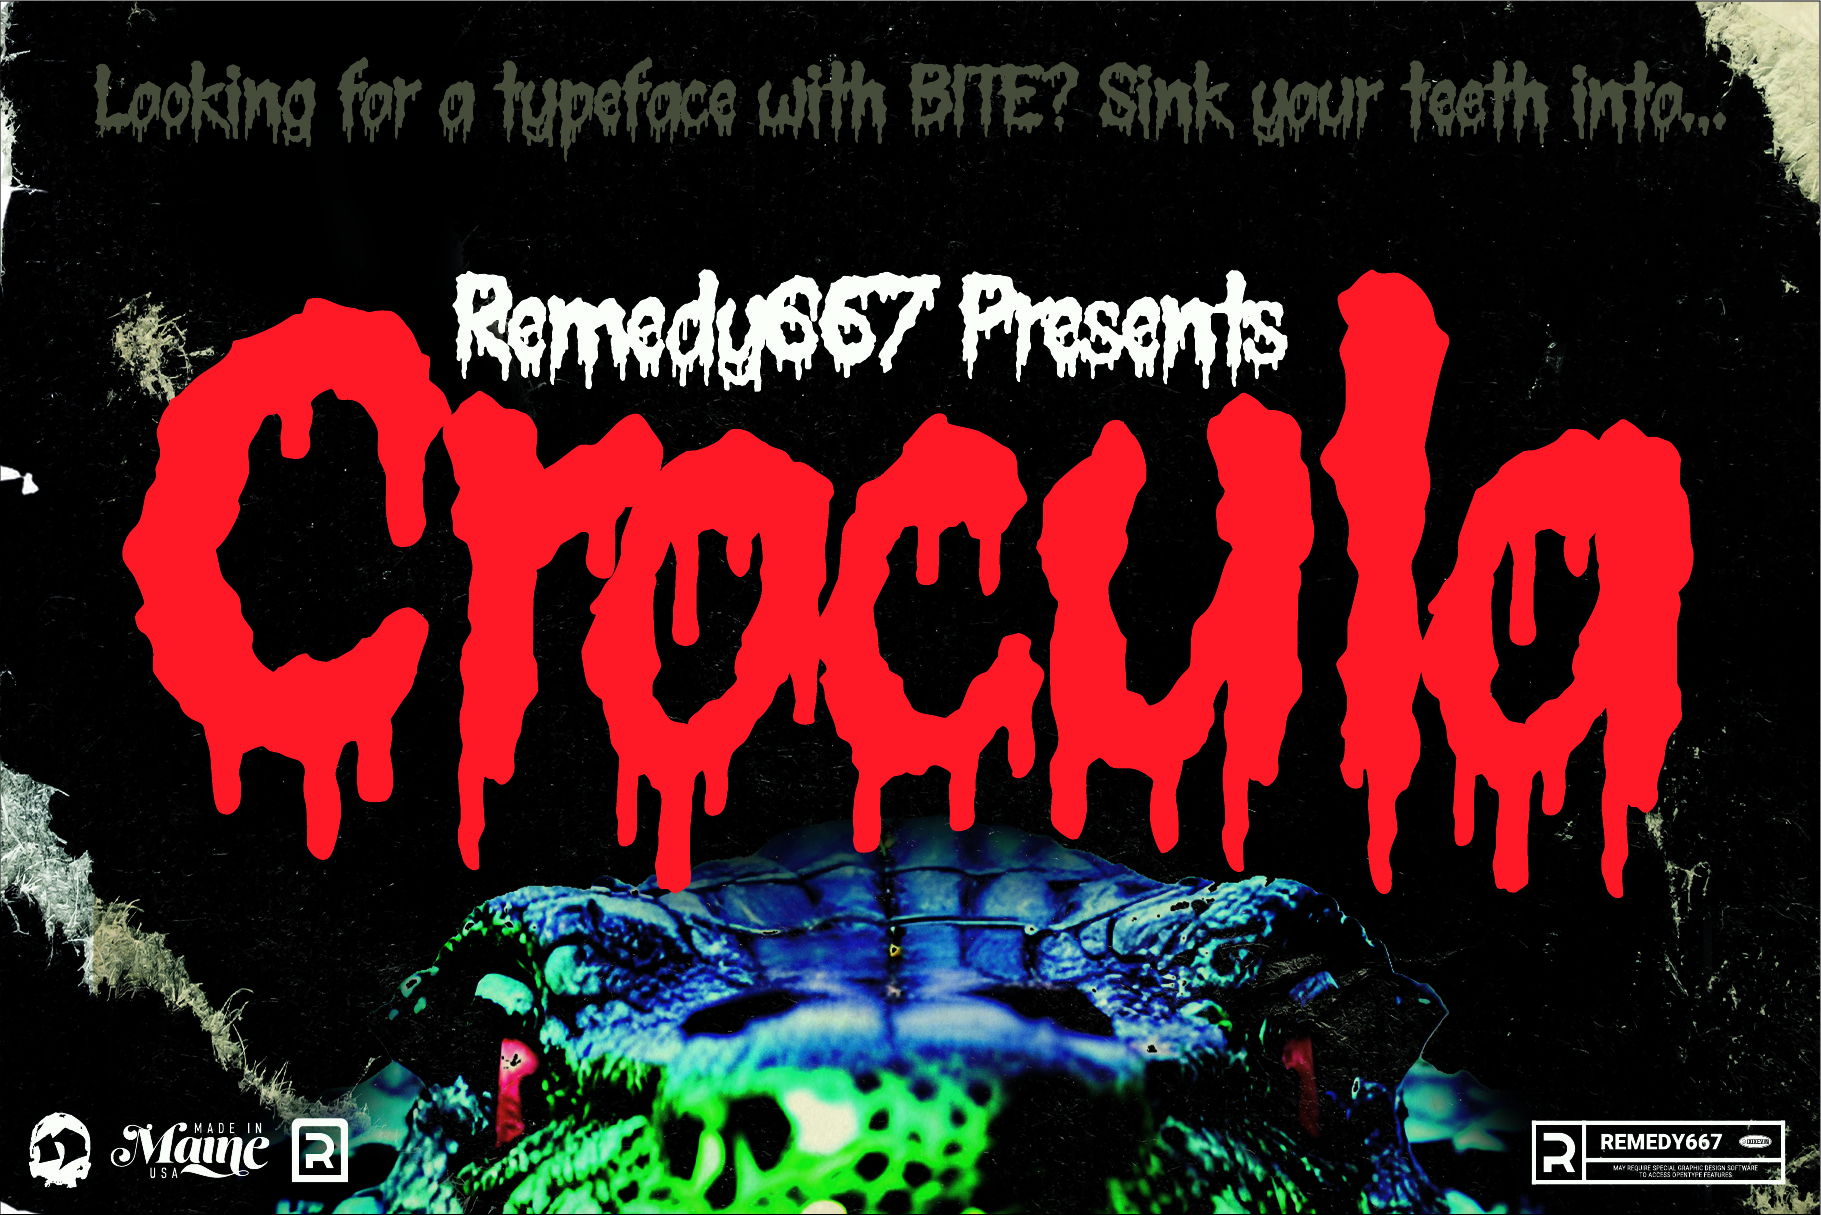 Remedy667 Crocula Dripping Horror Font Looking for a Typeface with Bit?